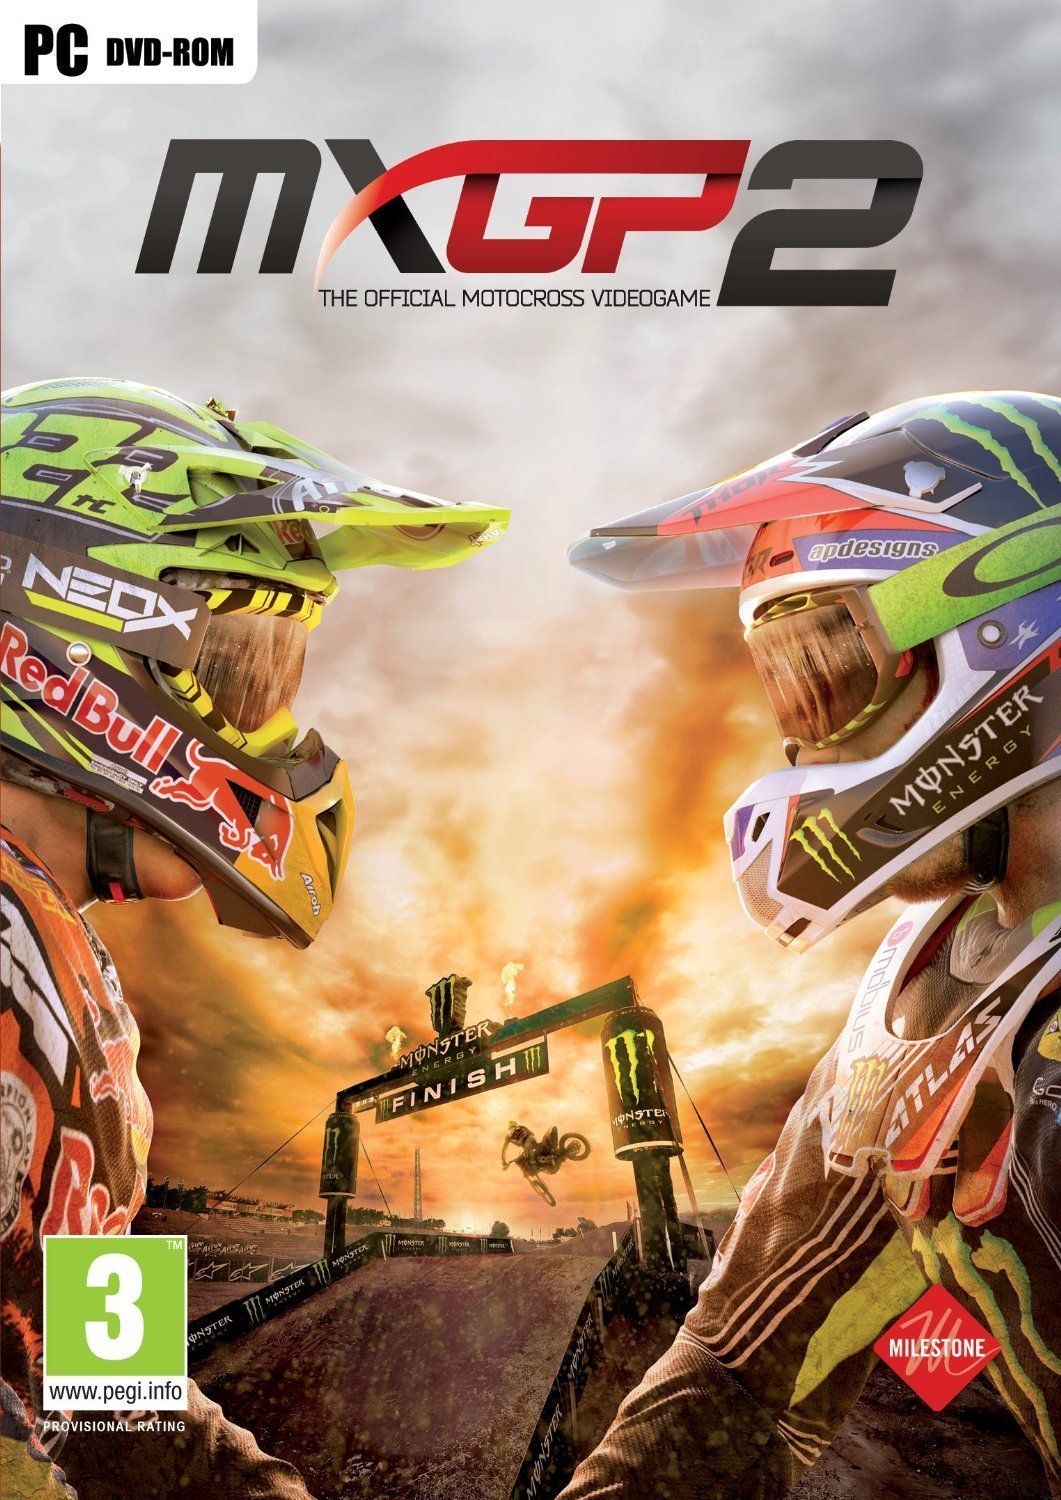 Image of MXGP 2: The Official Motocross Videogame